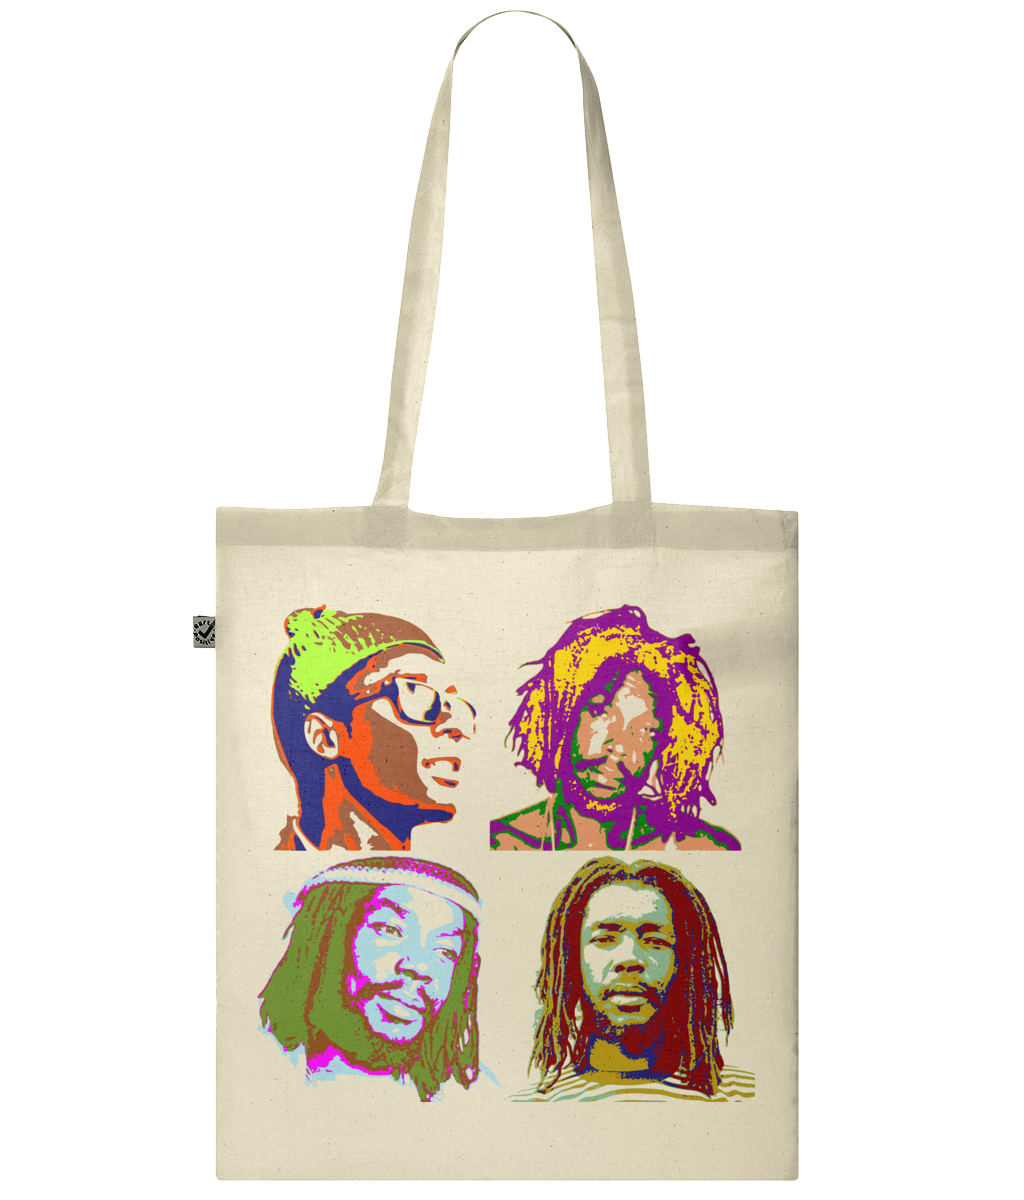 Peter Tosh tote shopping bag